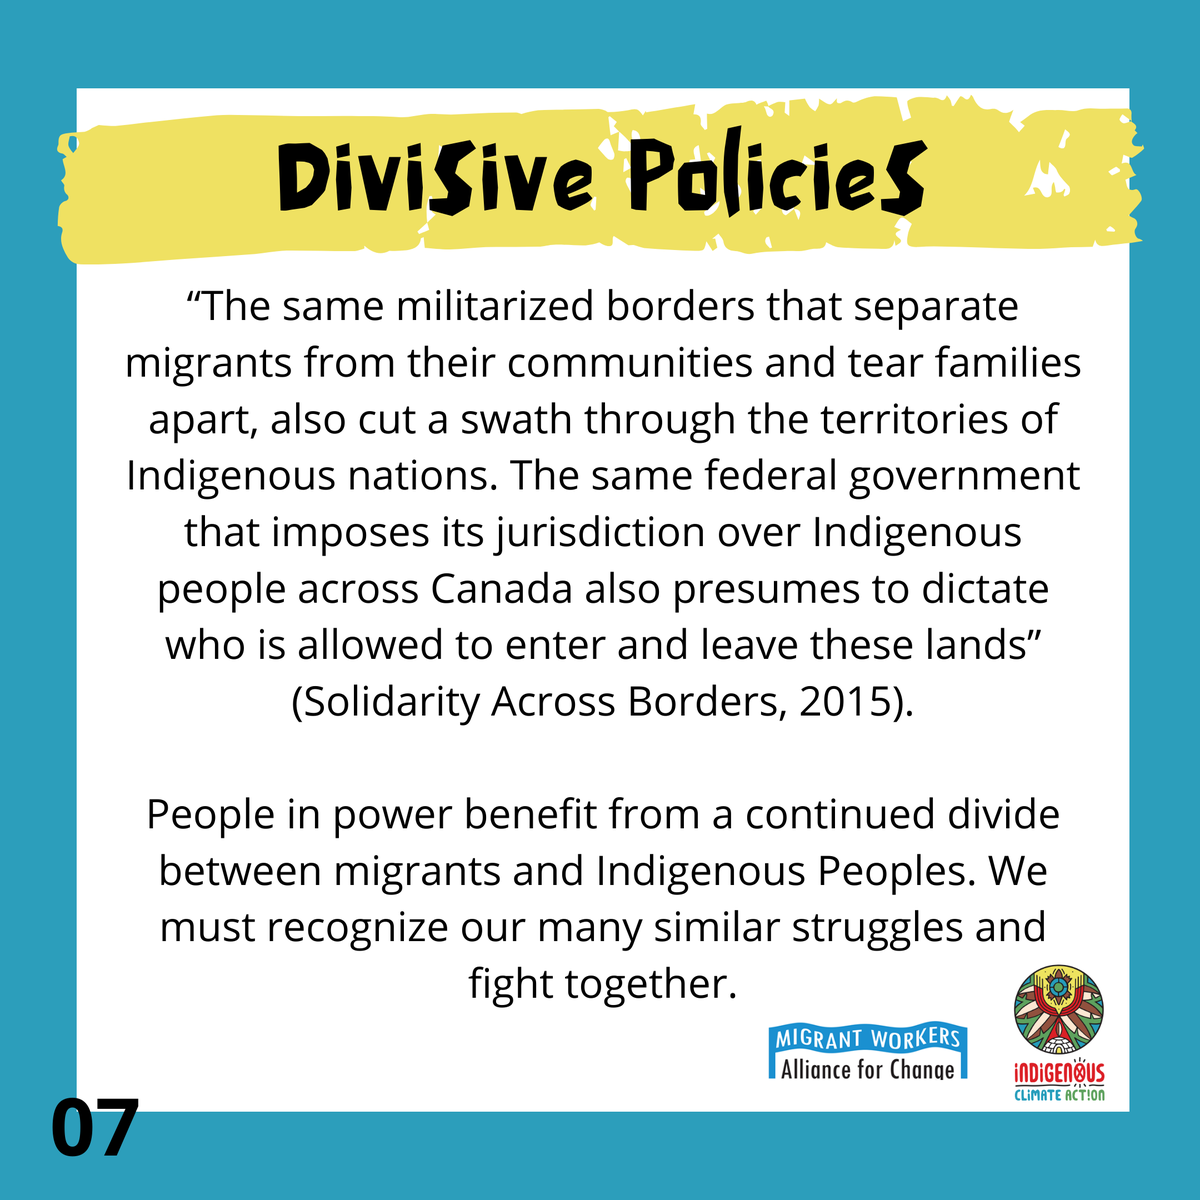 People in power benefit from a continued divide between migrants and Indigenous Peoples. We must recognize our many similar struggles and fight together (7/9)